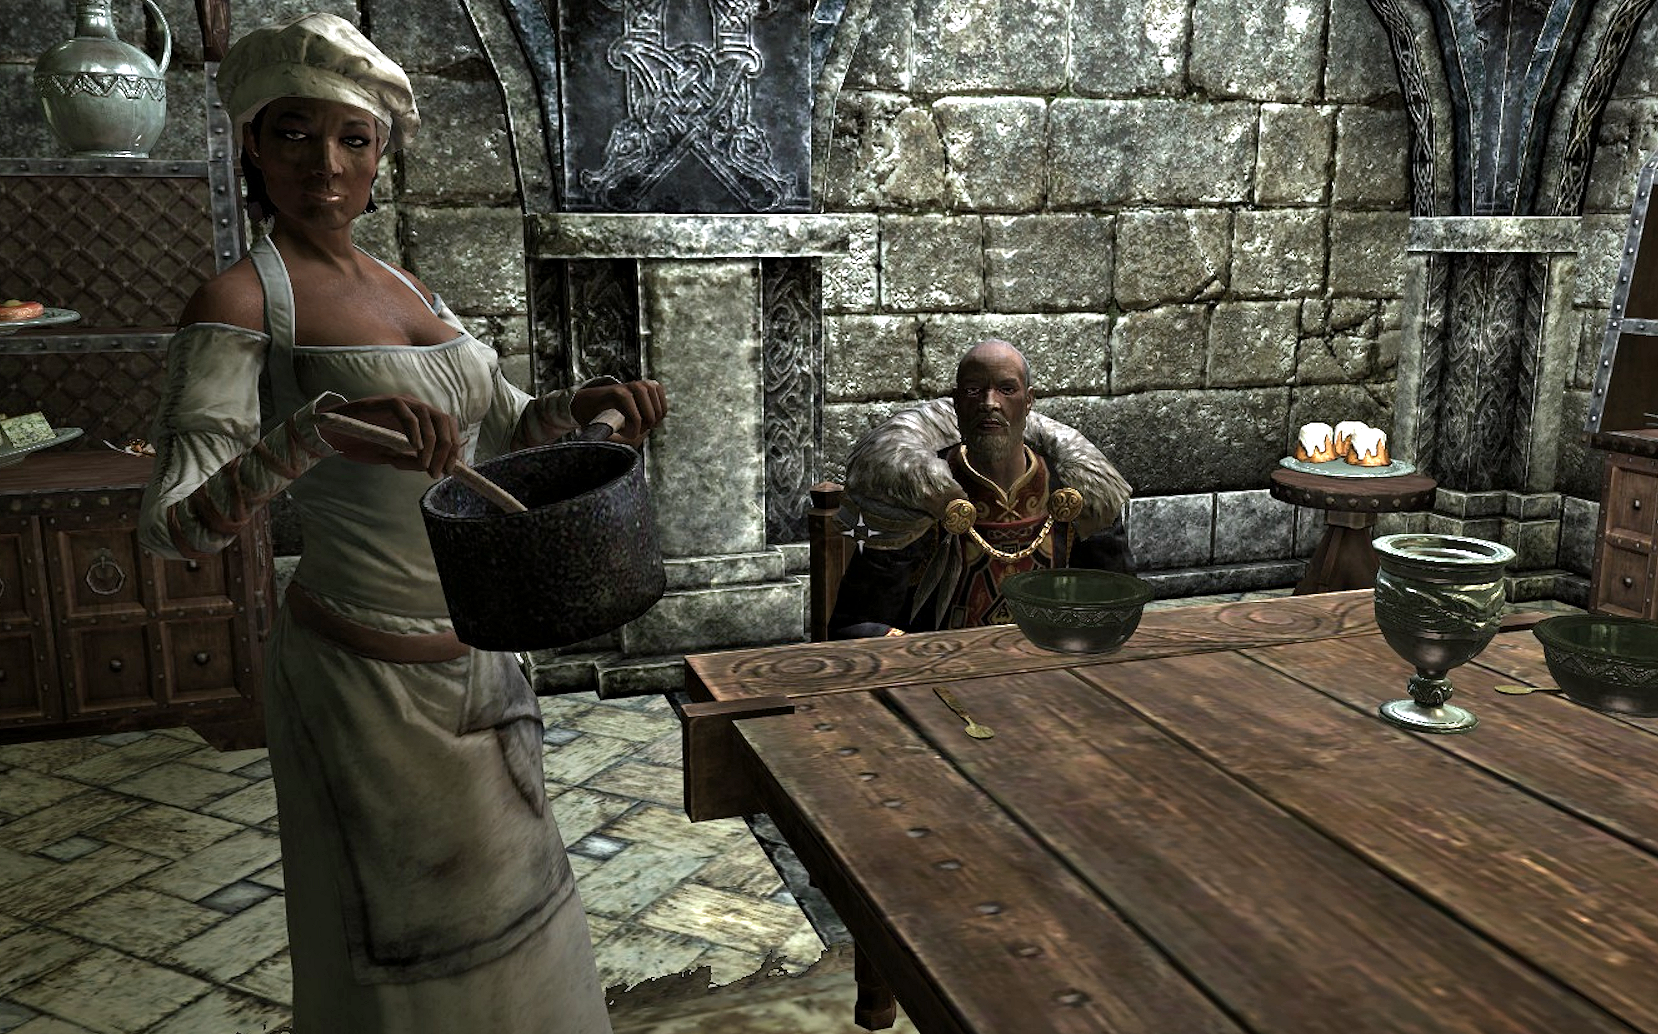 skyrim lead someone to become trapped